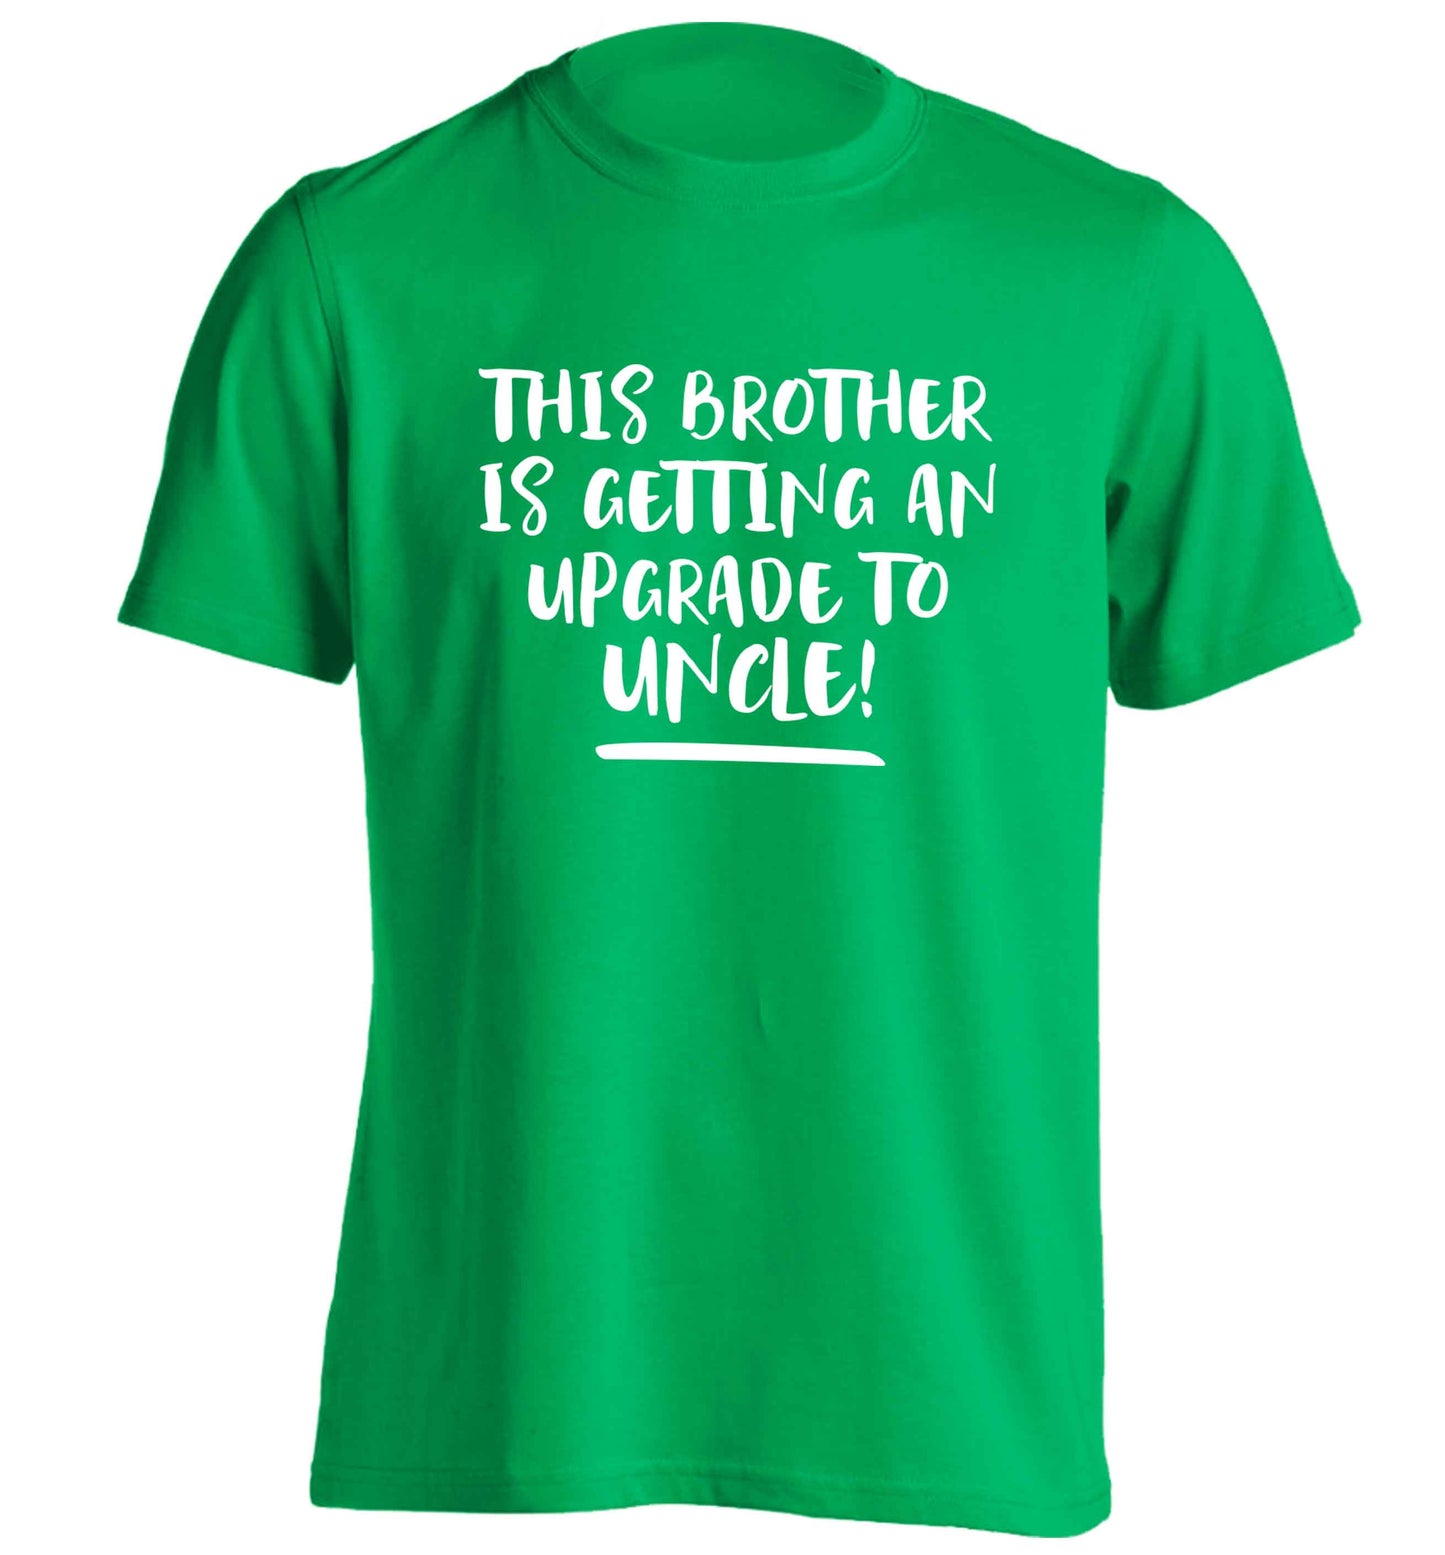 This brother is getting an upgrade to uncle! adults unisex green Tshirt 2XL